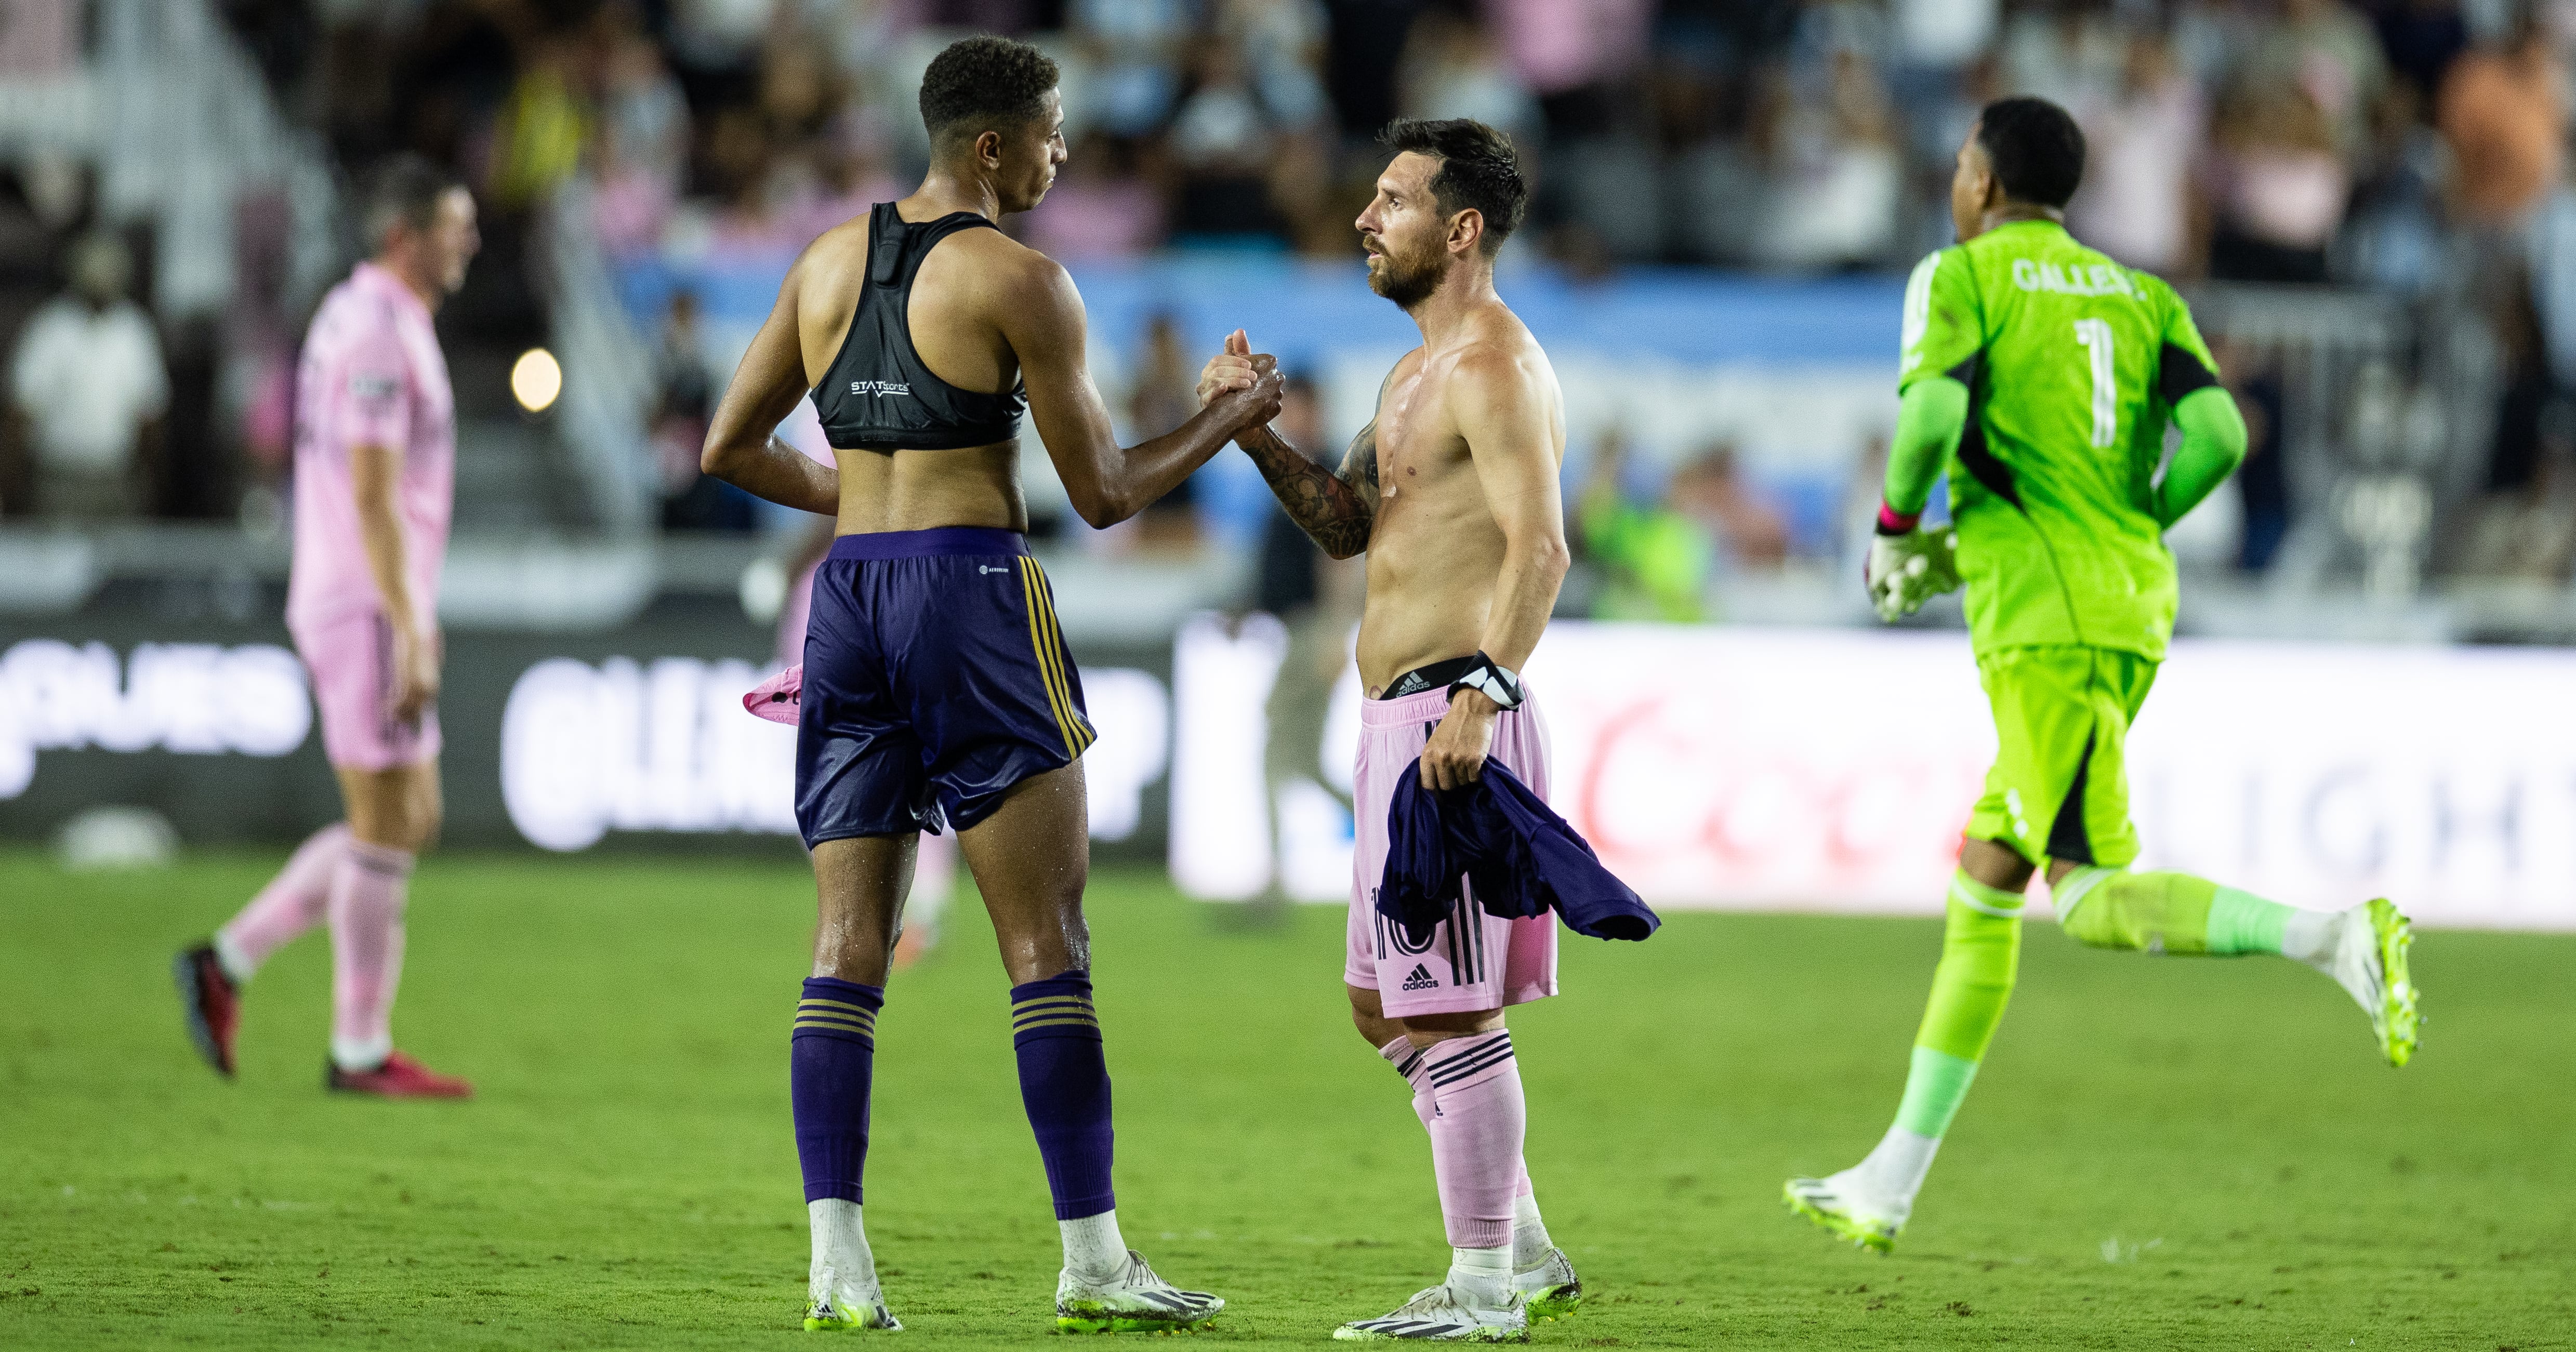 Why Do Soccer Players Wear Bras? Here's The Answer - Discover